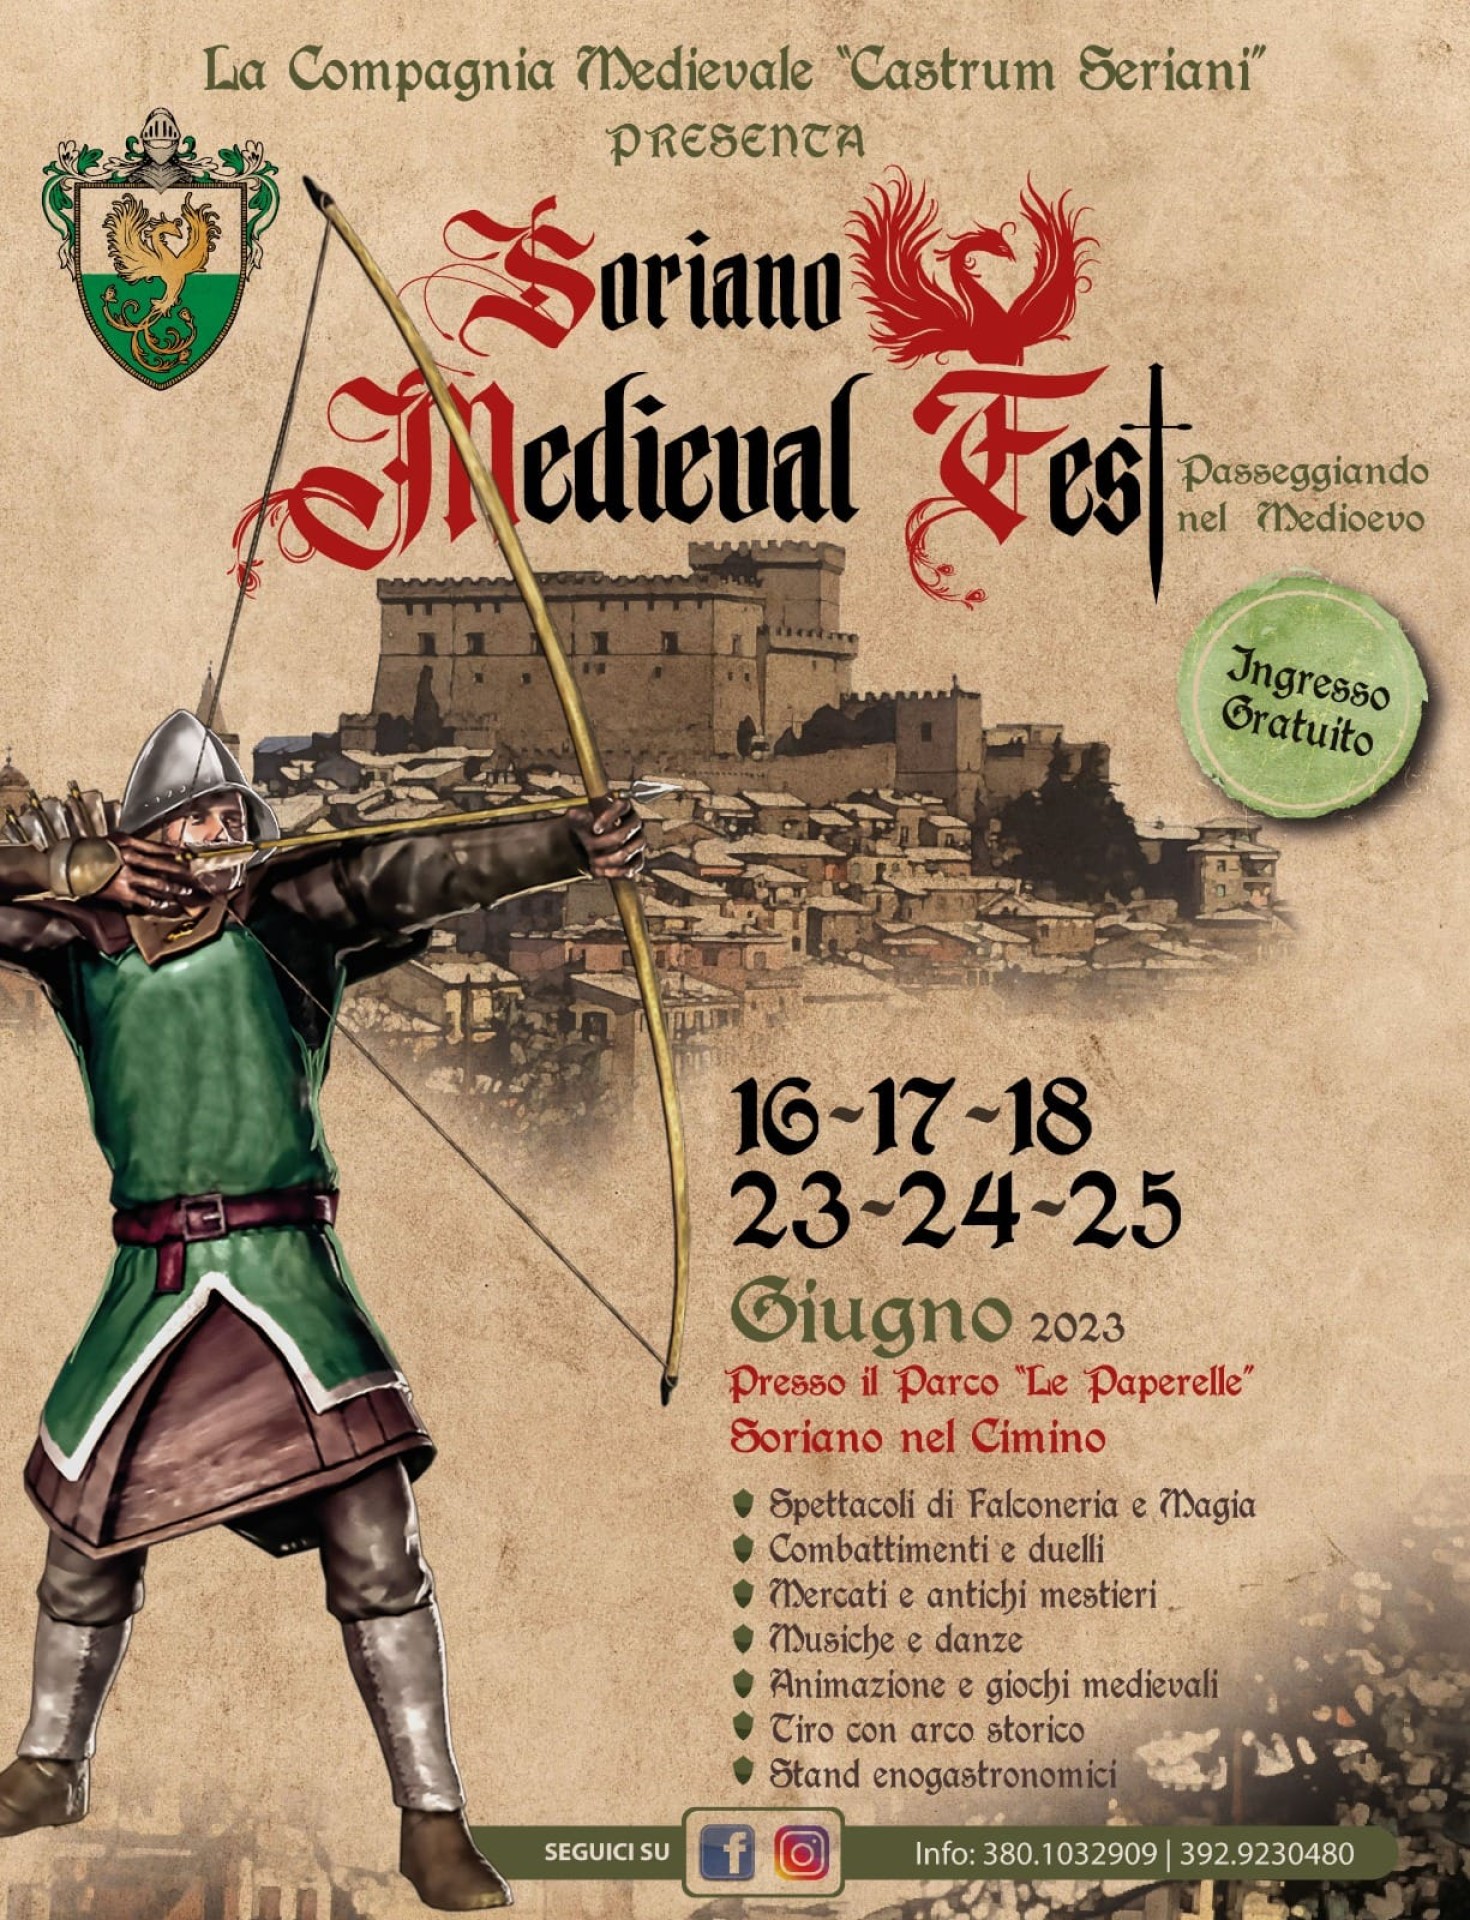 SORIANO MEDIEVAL FEST 2023